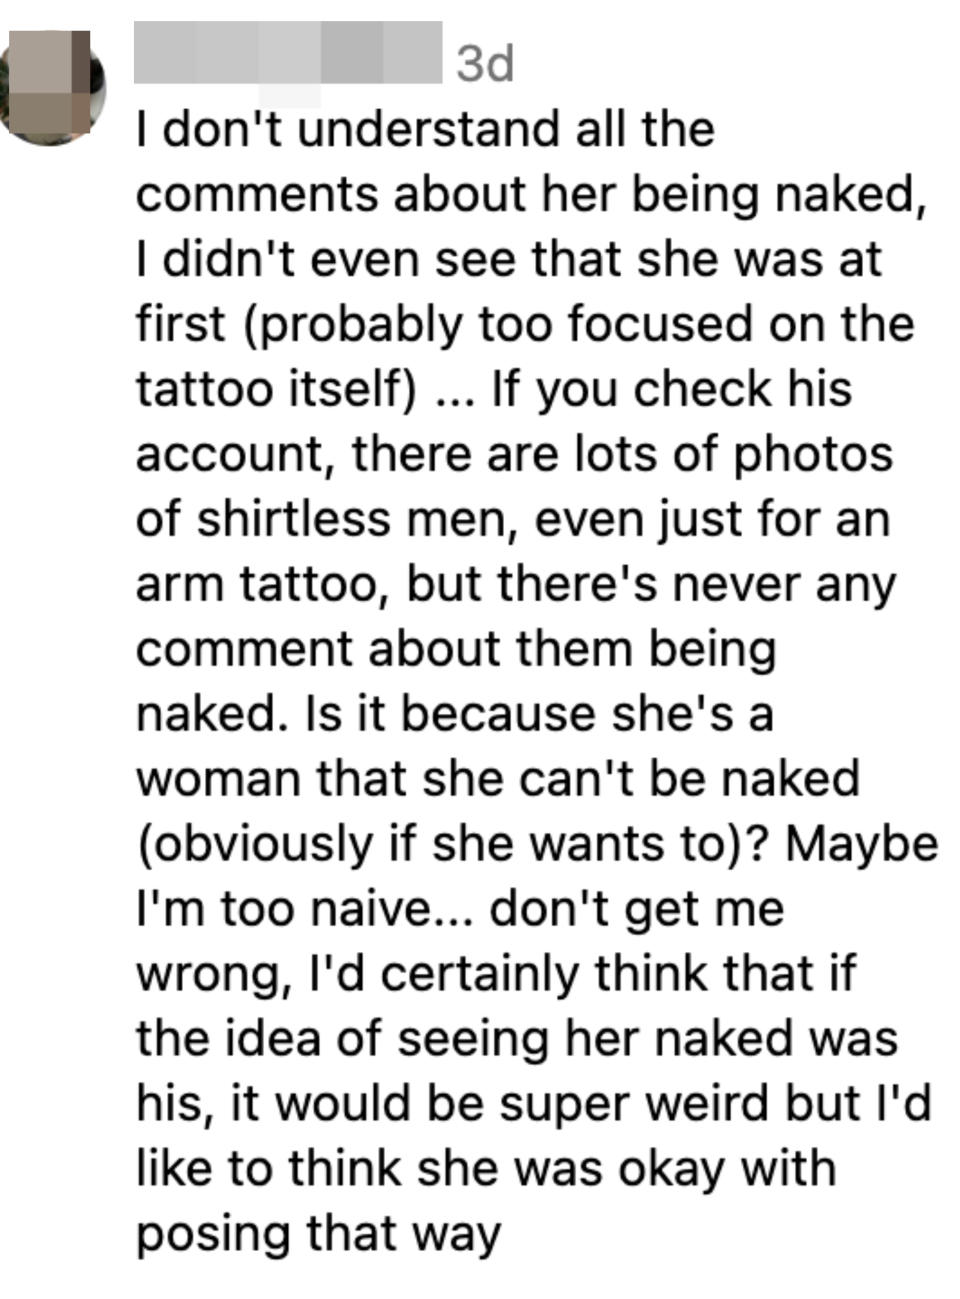 person saying they didn't realize she was naked at first because they were focused on the tattoo